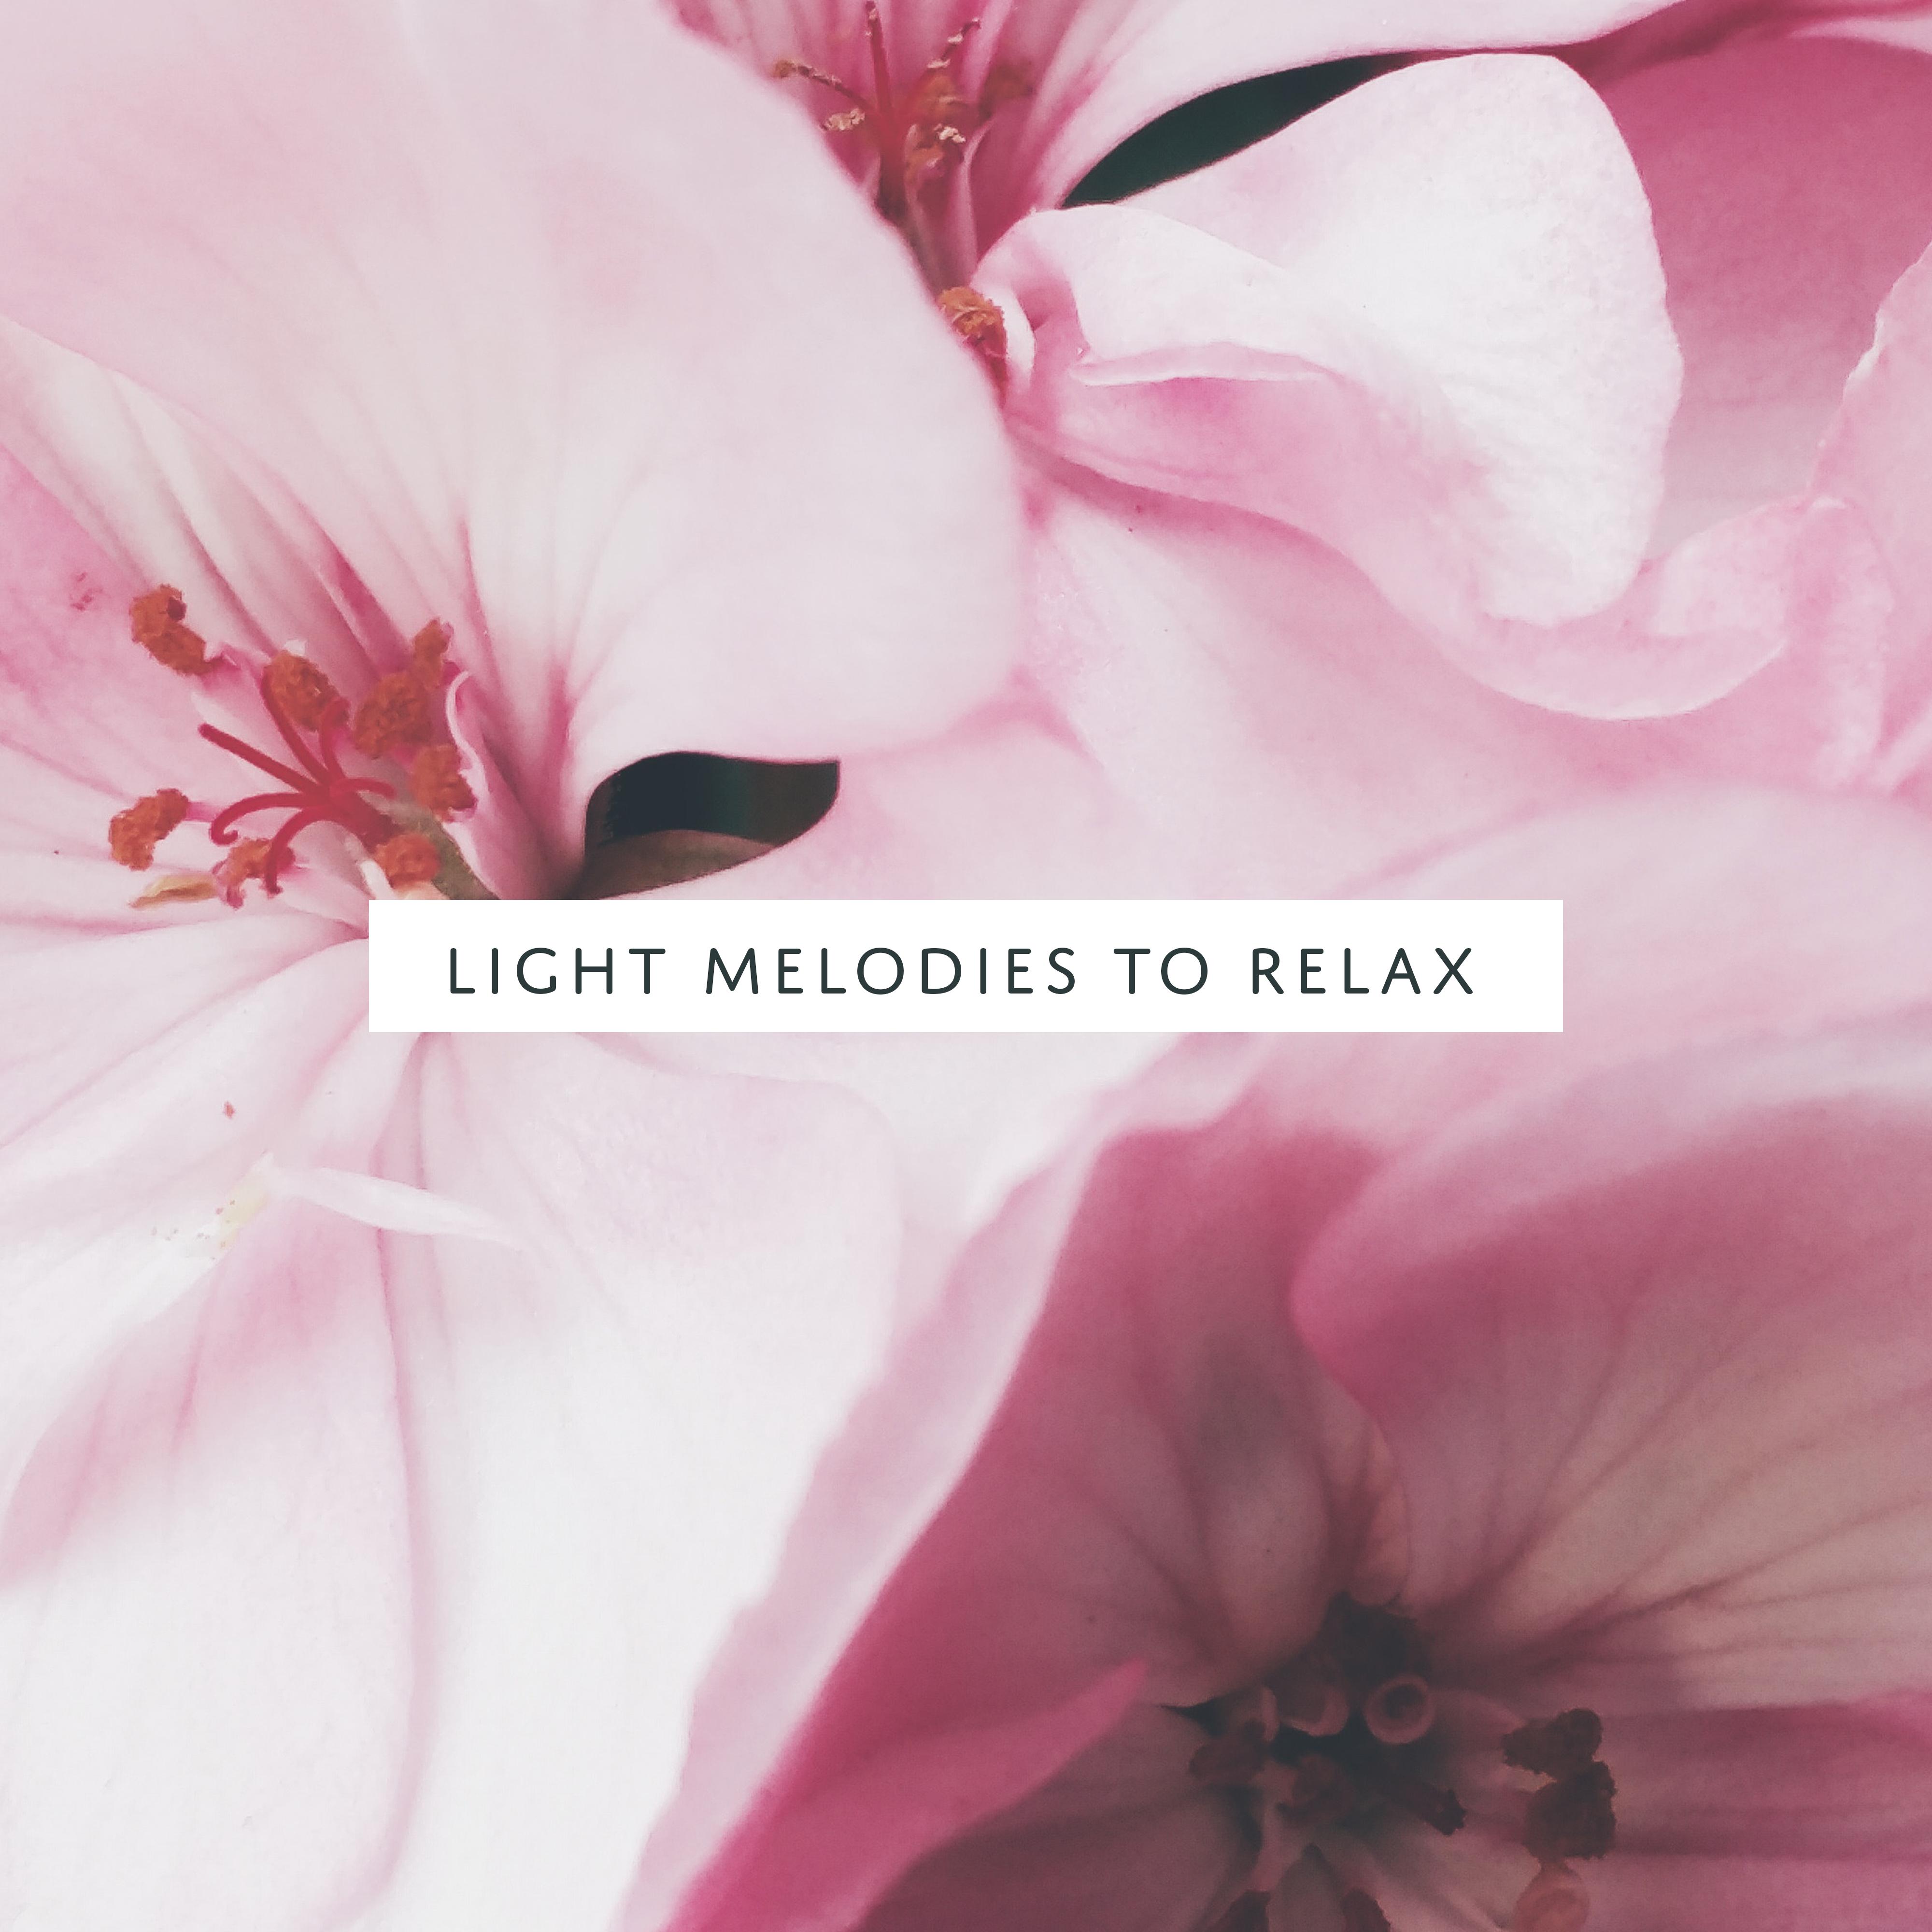 Light Melodies to Relax